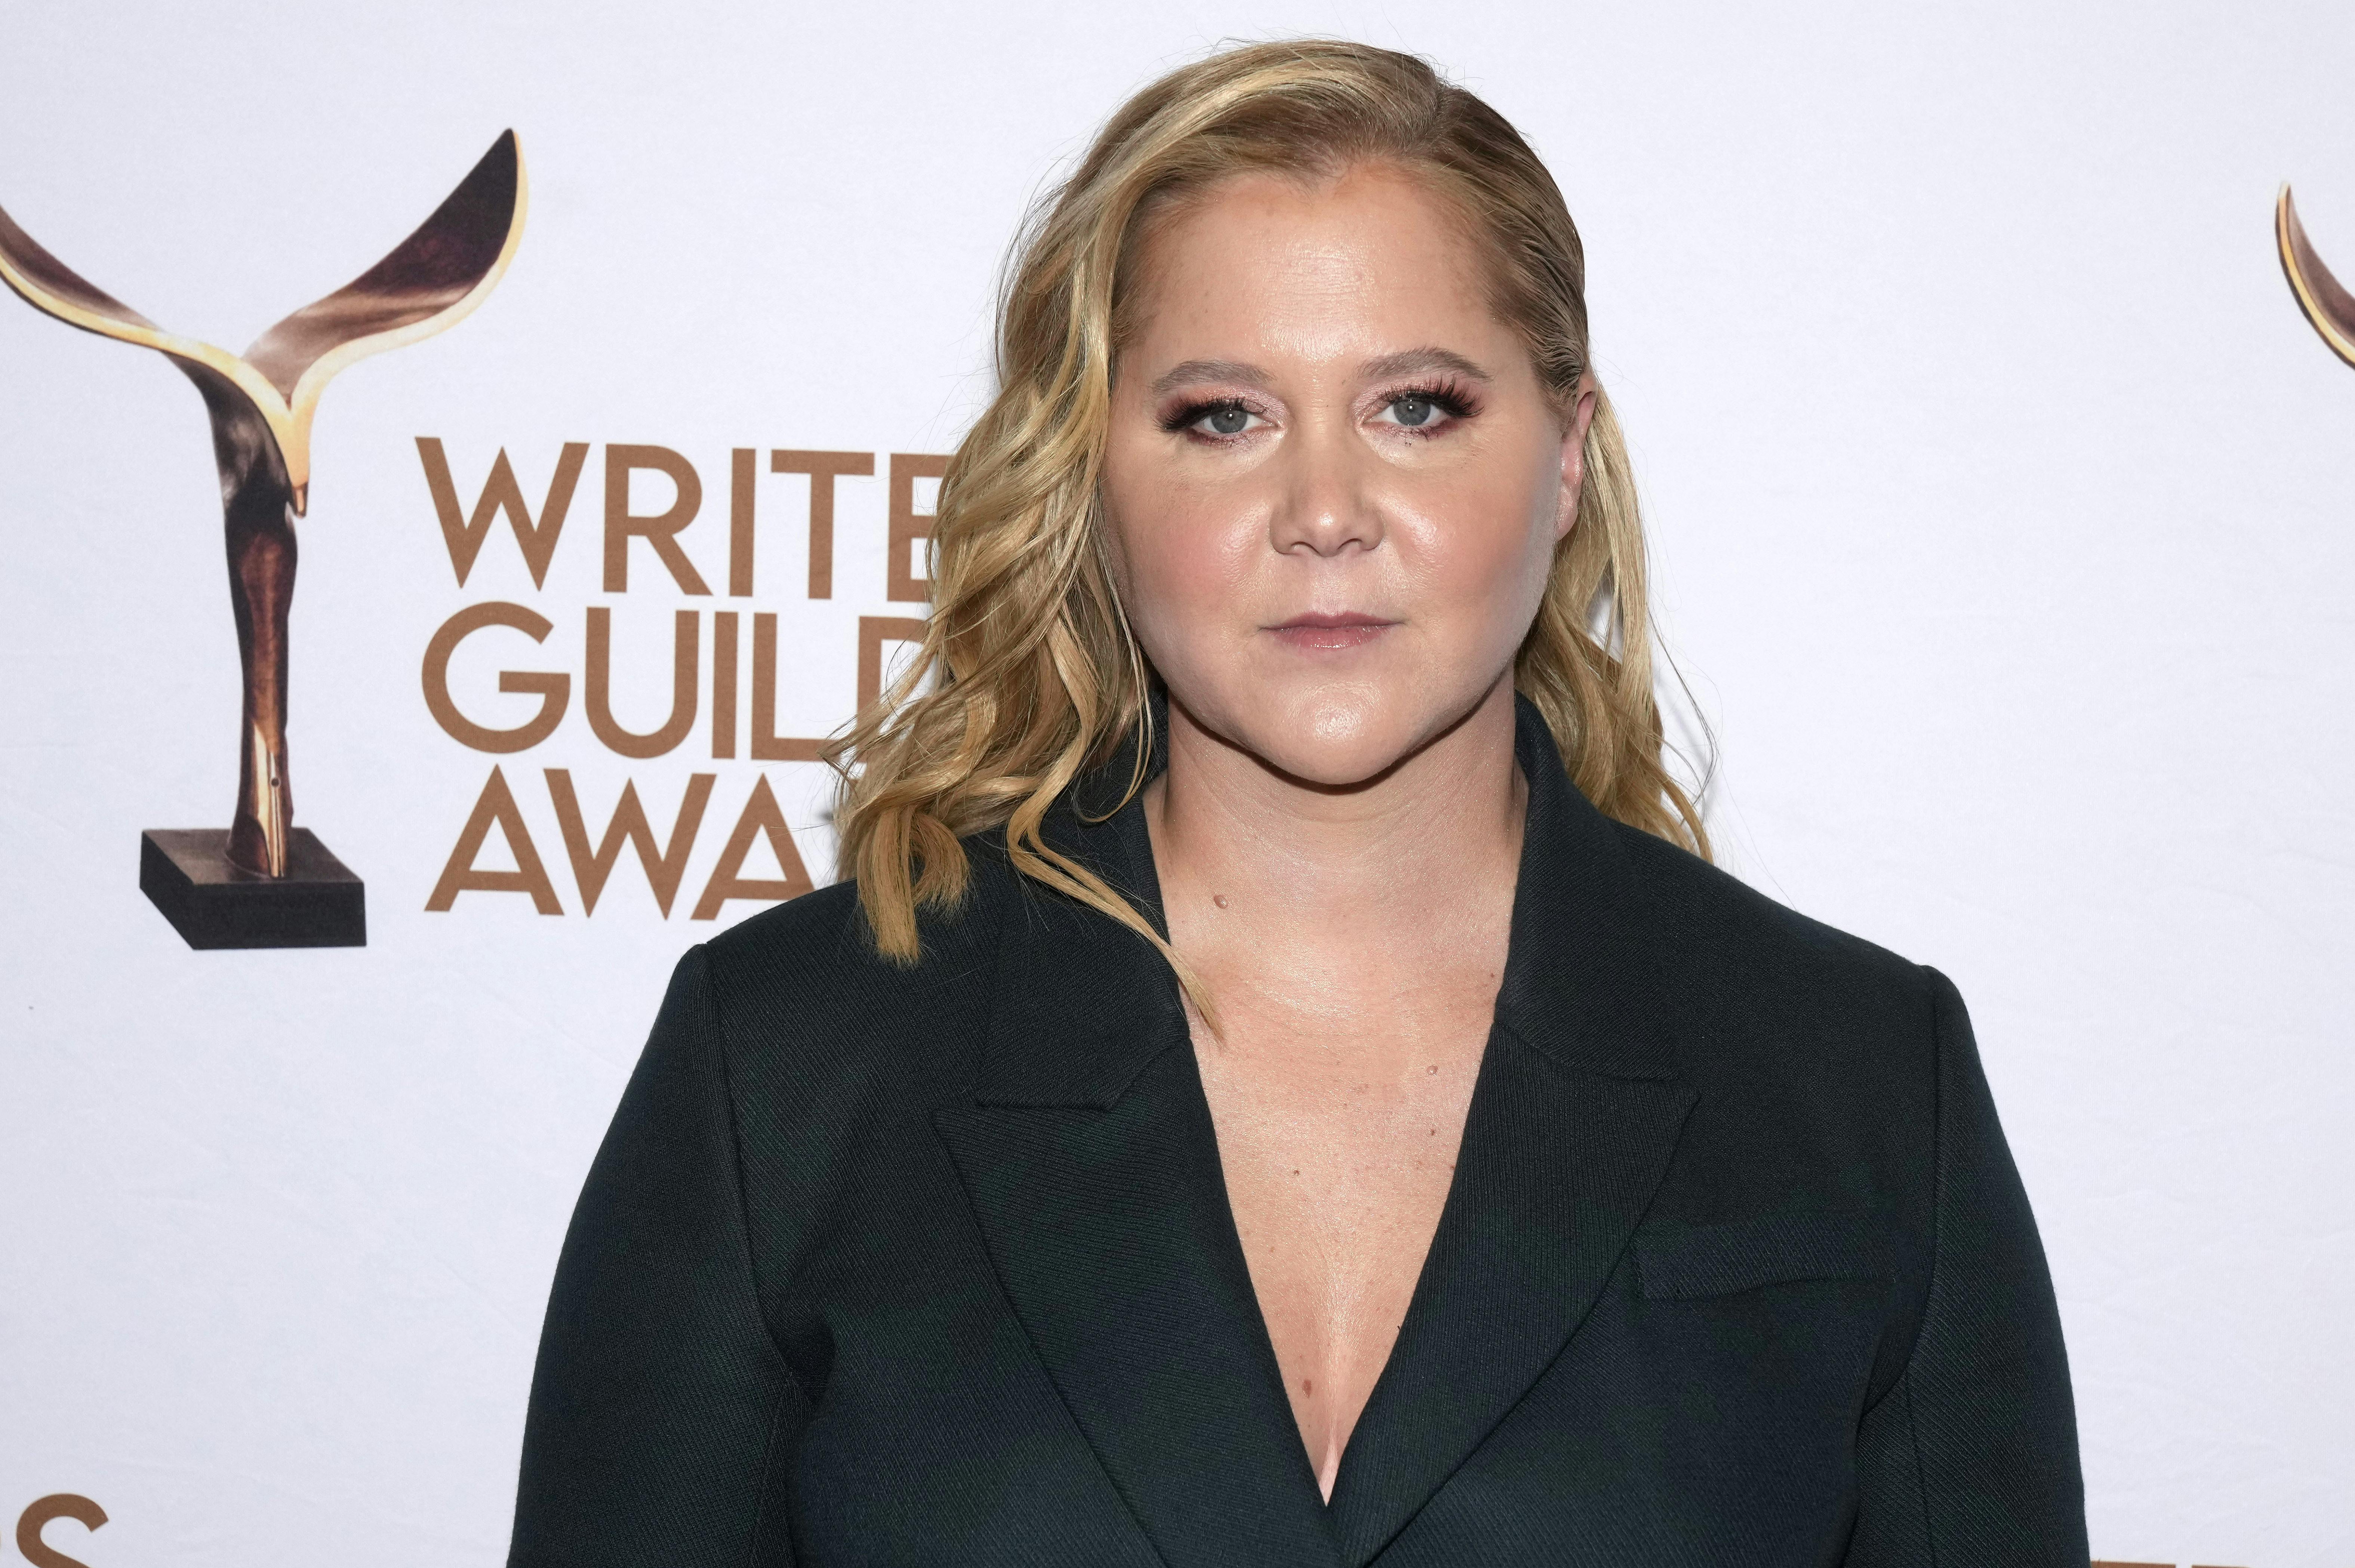 Amy Schumer attends the 75th annual Writers Guild Awards at the Edison Ballroom on Sunday, March 5, 2023 in New York. (Photo by Charles Sykes/Invision/AP)